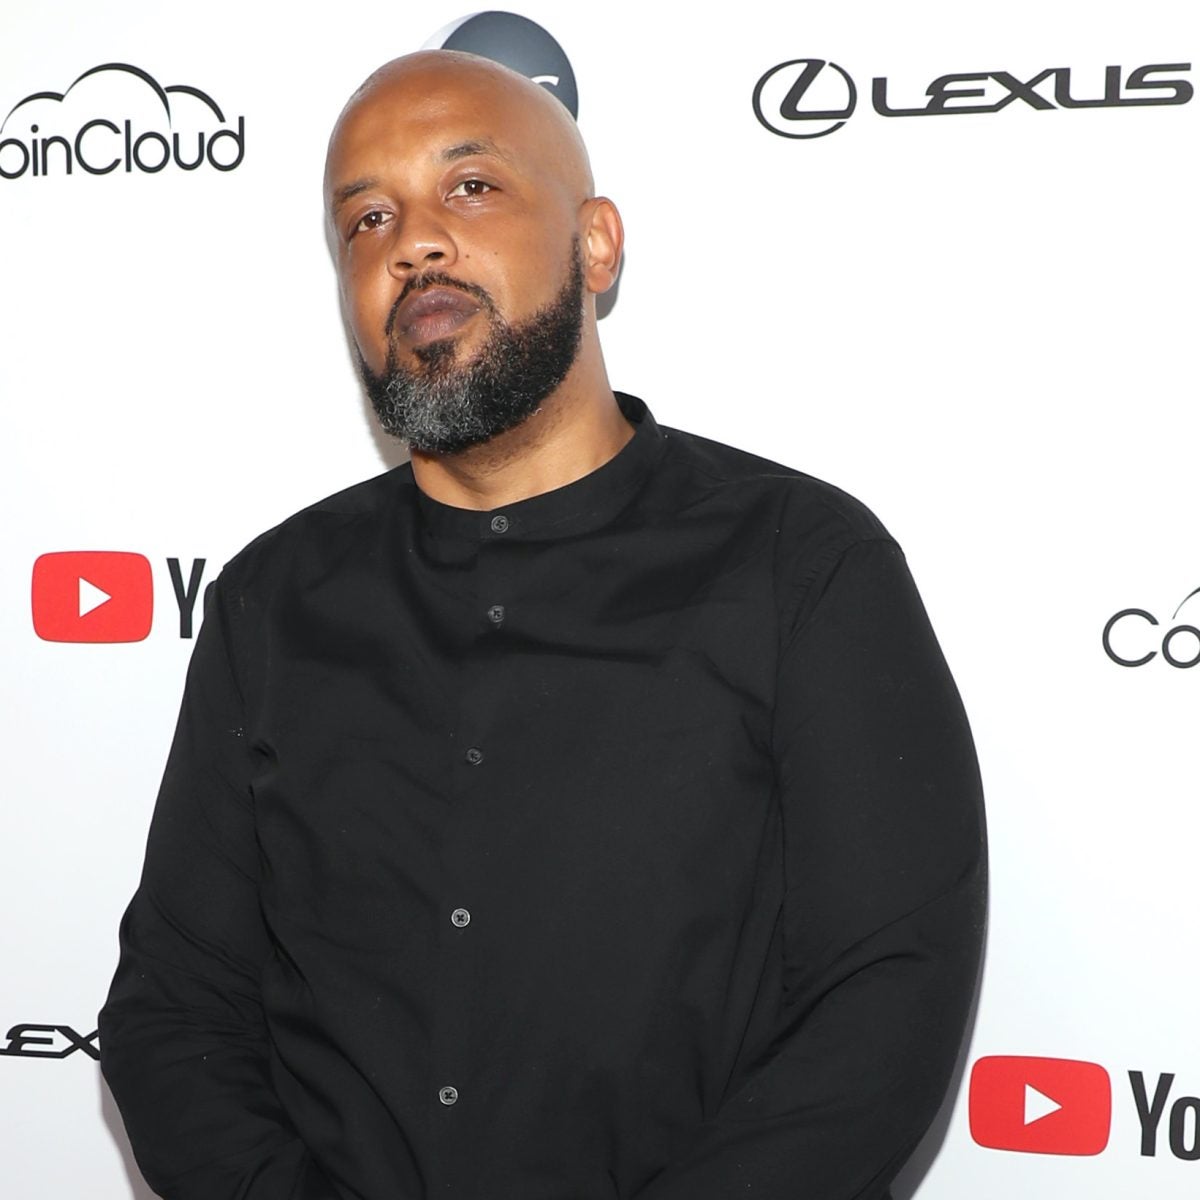 YouTube's Tuma Basa talks Keeping Things Dope for Black Artists on the platform, Announces #YouTubeBlack Voices Music Class of 2022